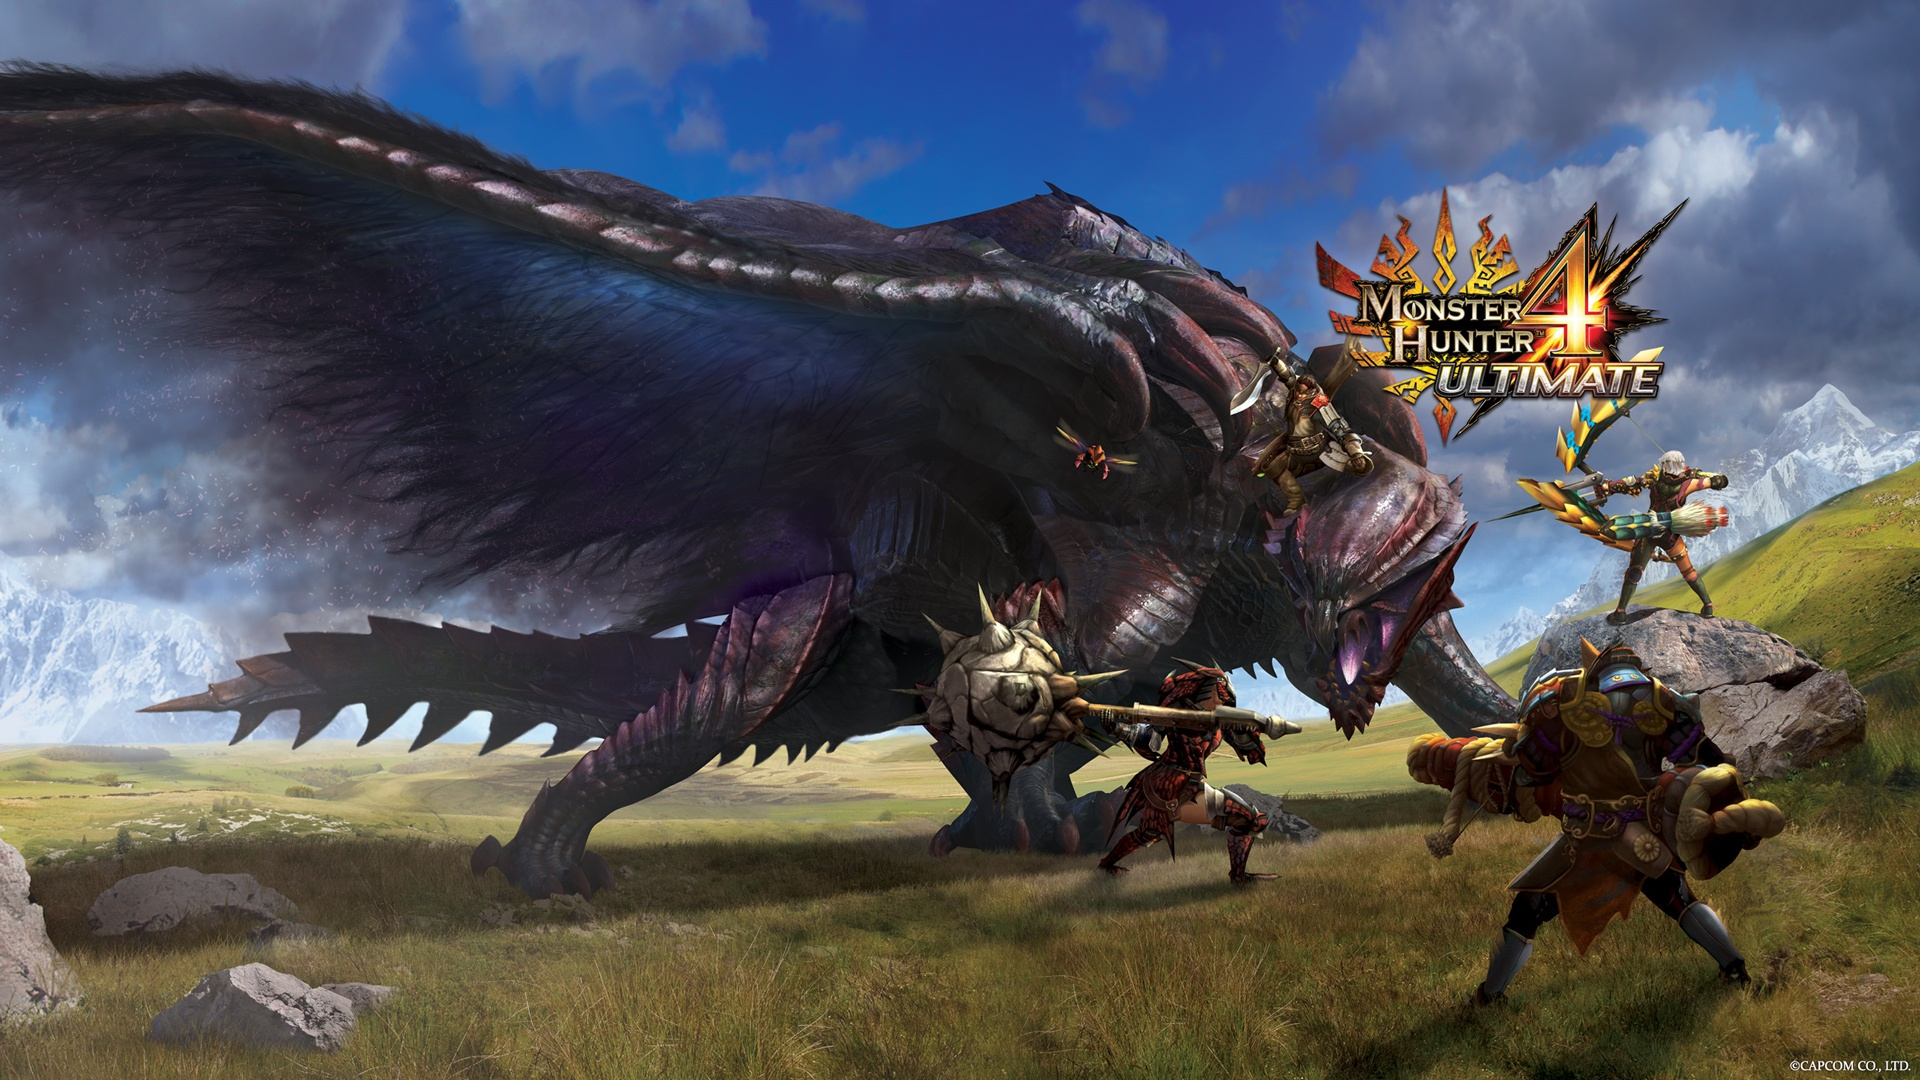 Getting The Most Out Of Monster Hunter 4 Ultimate Guide